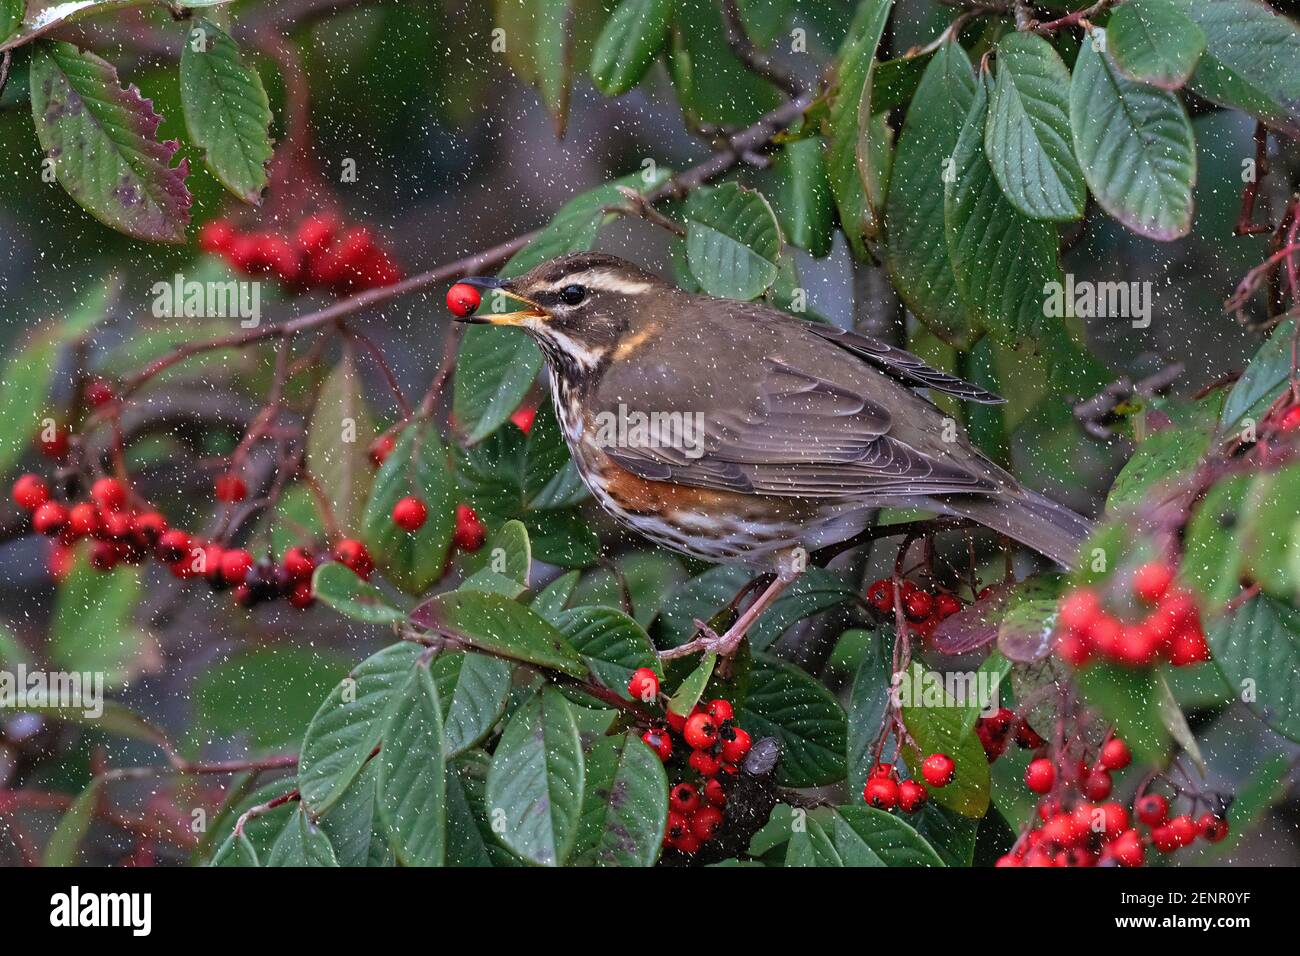 Redwing-Turdus iliacus feeds on Cotoneaster berries in snow. Stock Photo